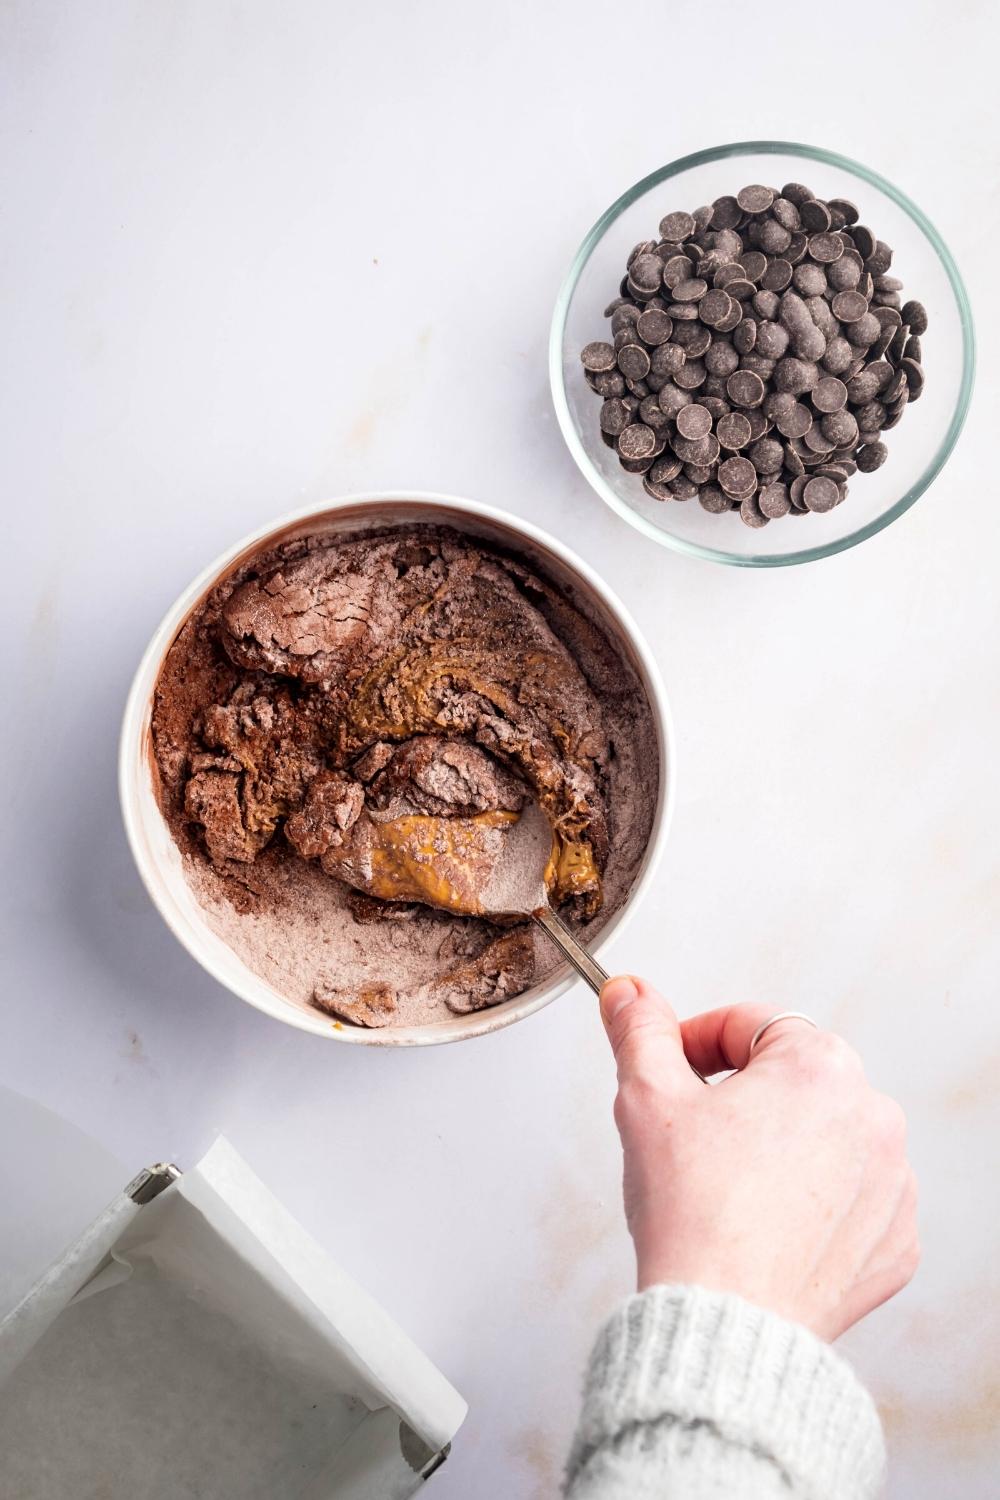 A hand holding a spoon mixing together protein brownie ingredients. Next to it is a small bowl of chocolate chips all on a white counter.